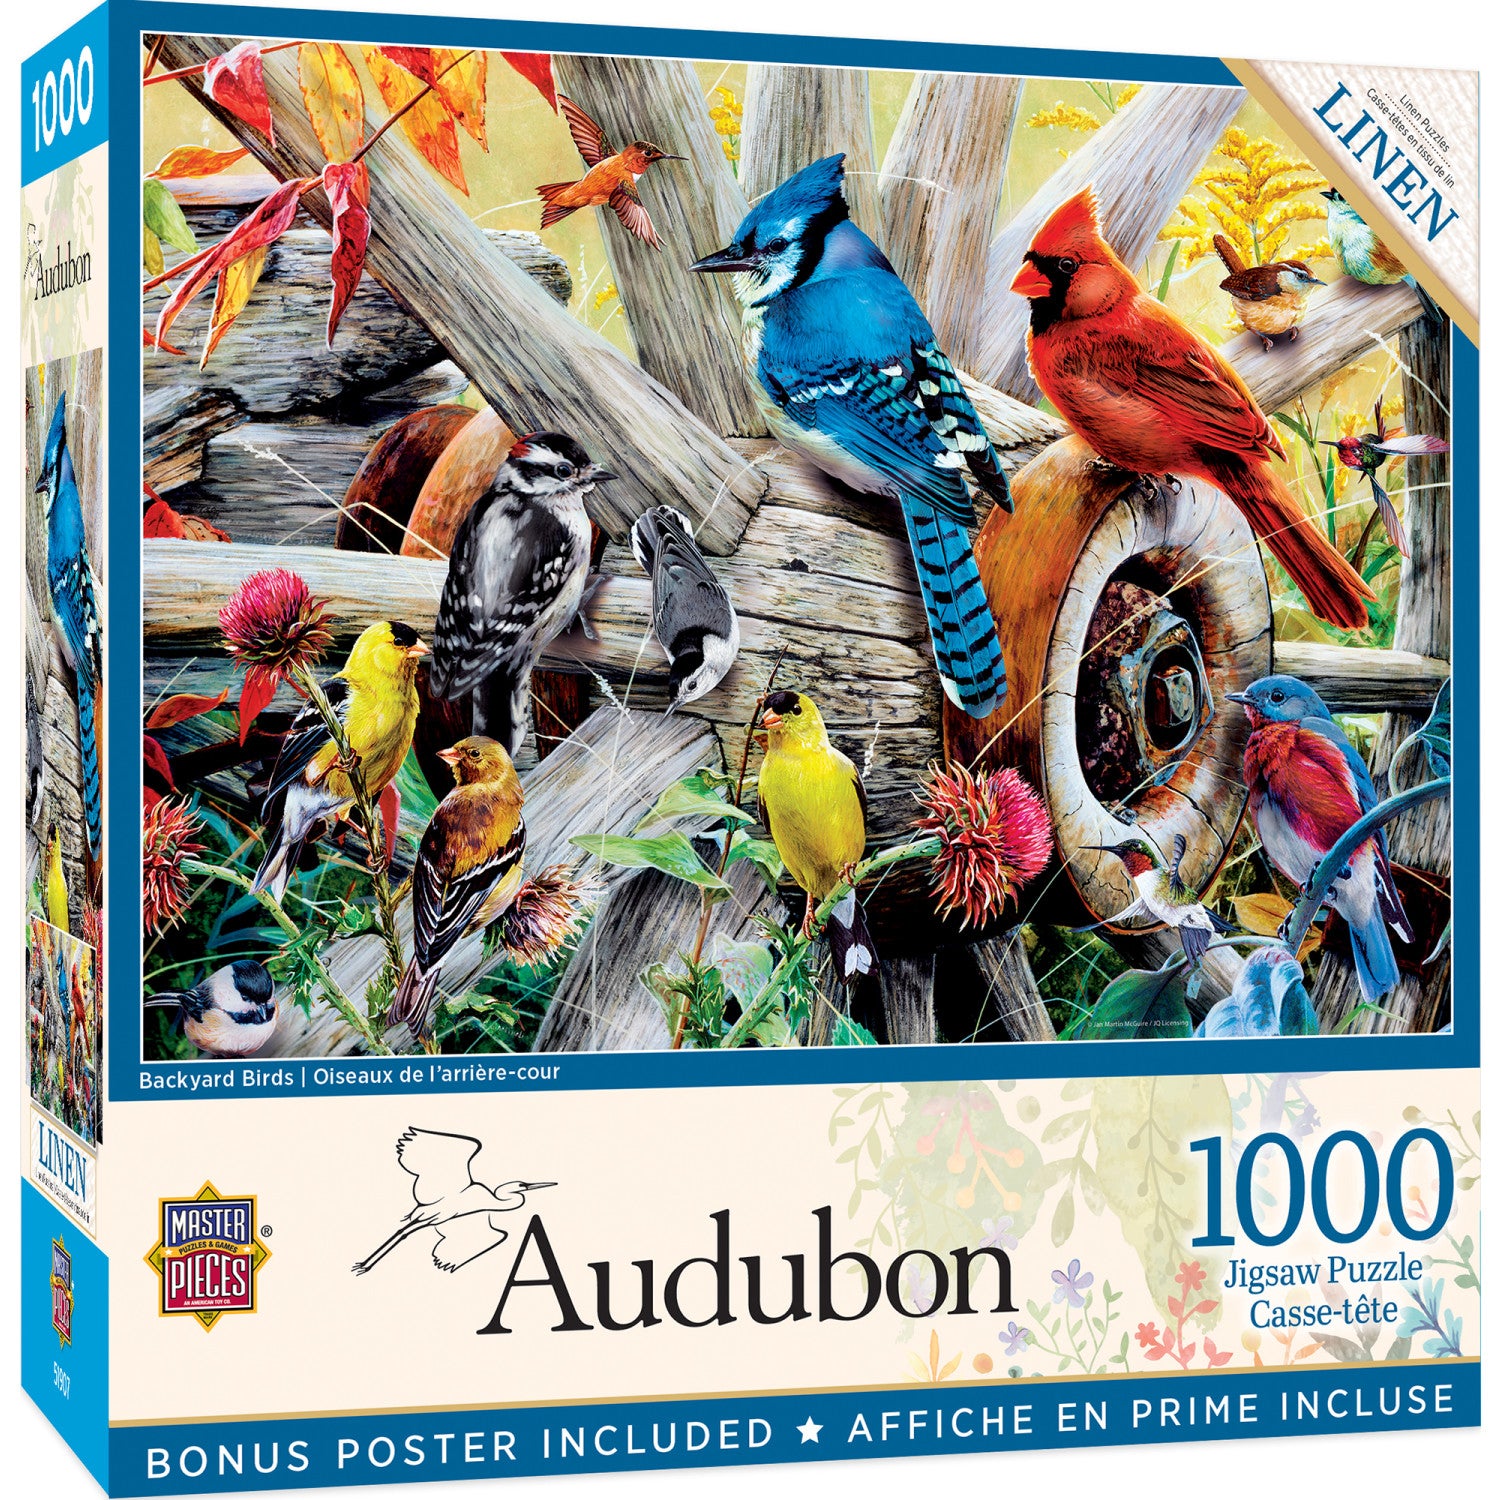 Chubby Birds Puzzle 300 Piece for Kids and Adults – PUZZLE EZ